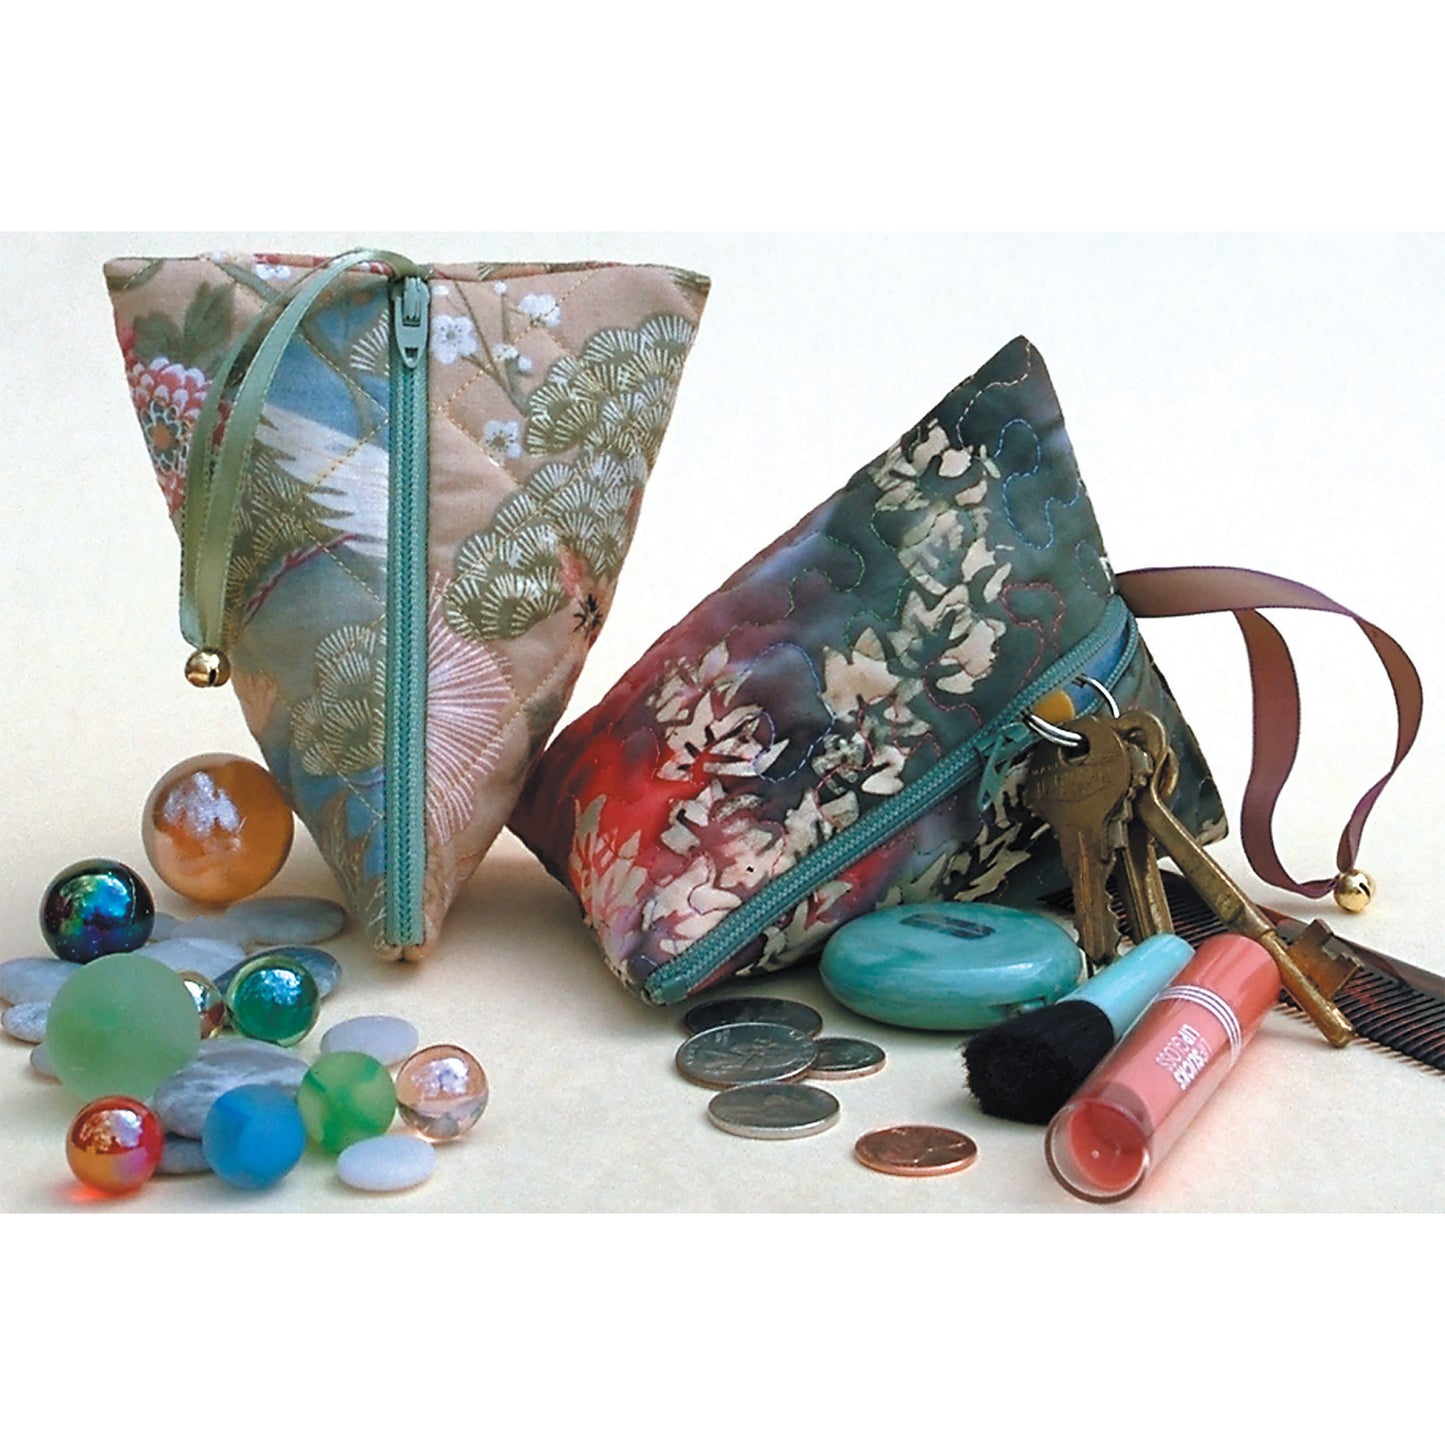 Small purse adorned with beads and coins, Humbug Bag inspired by 19th century English candy, a quick and fun gift to make.